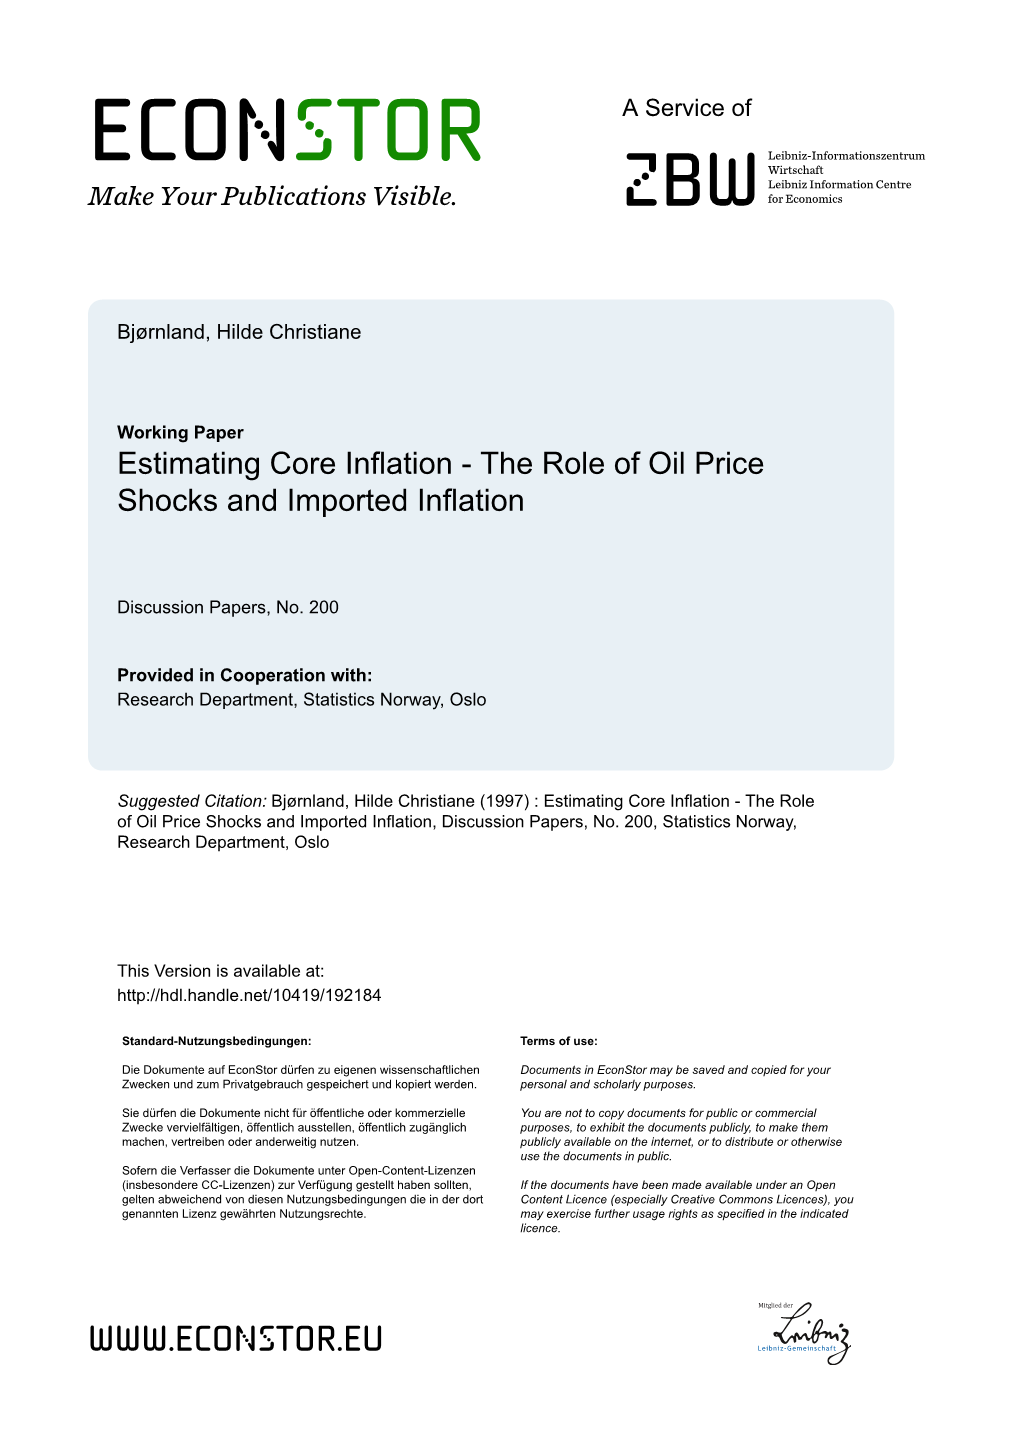 Estimating Core Inflation - the Role of Oil Price Shocks and Imported Inflation